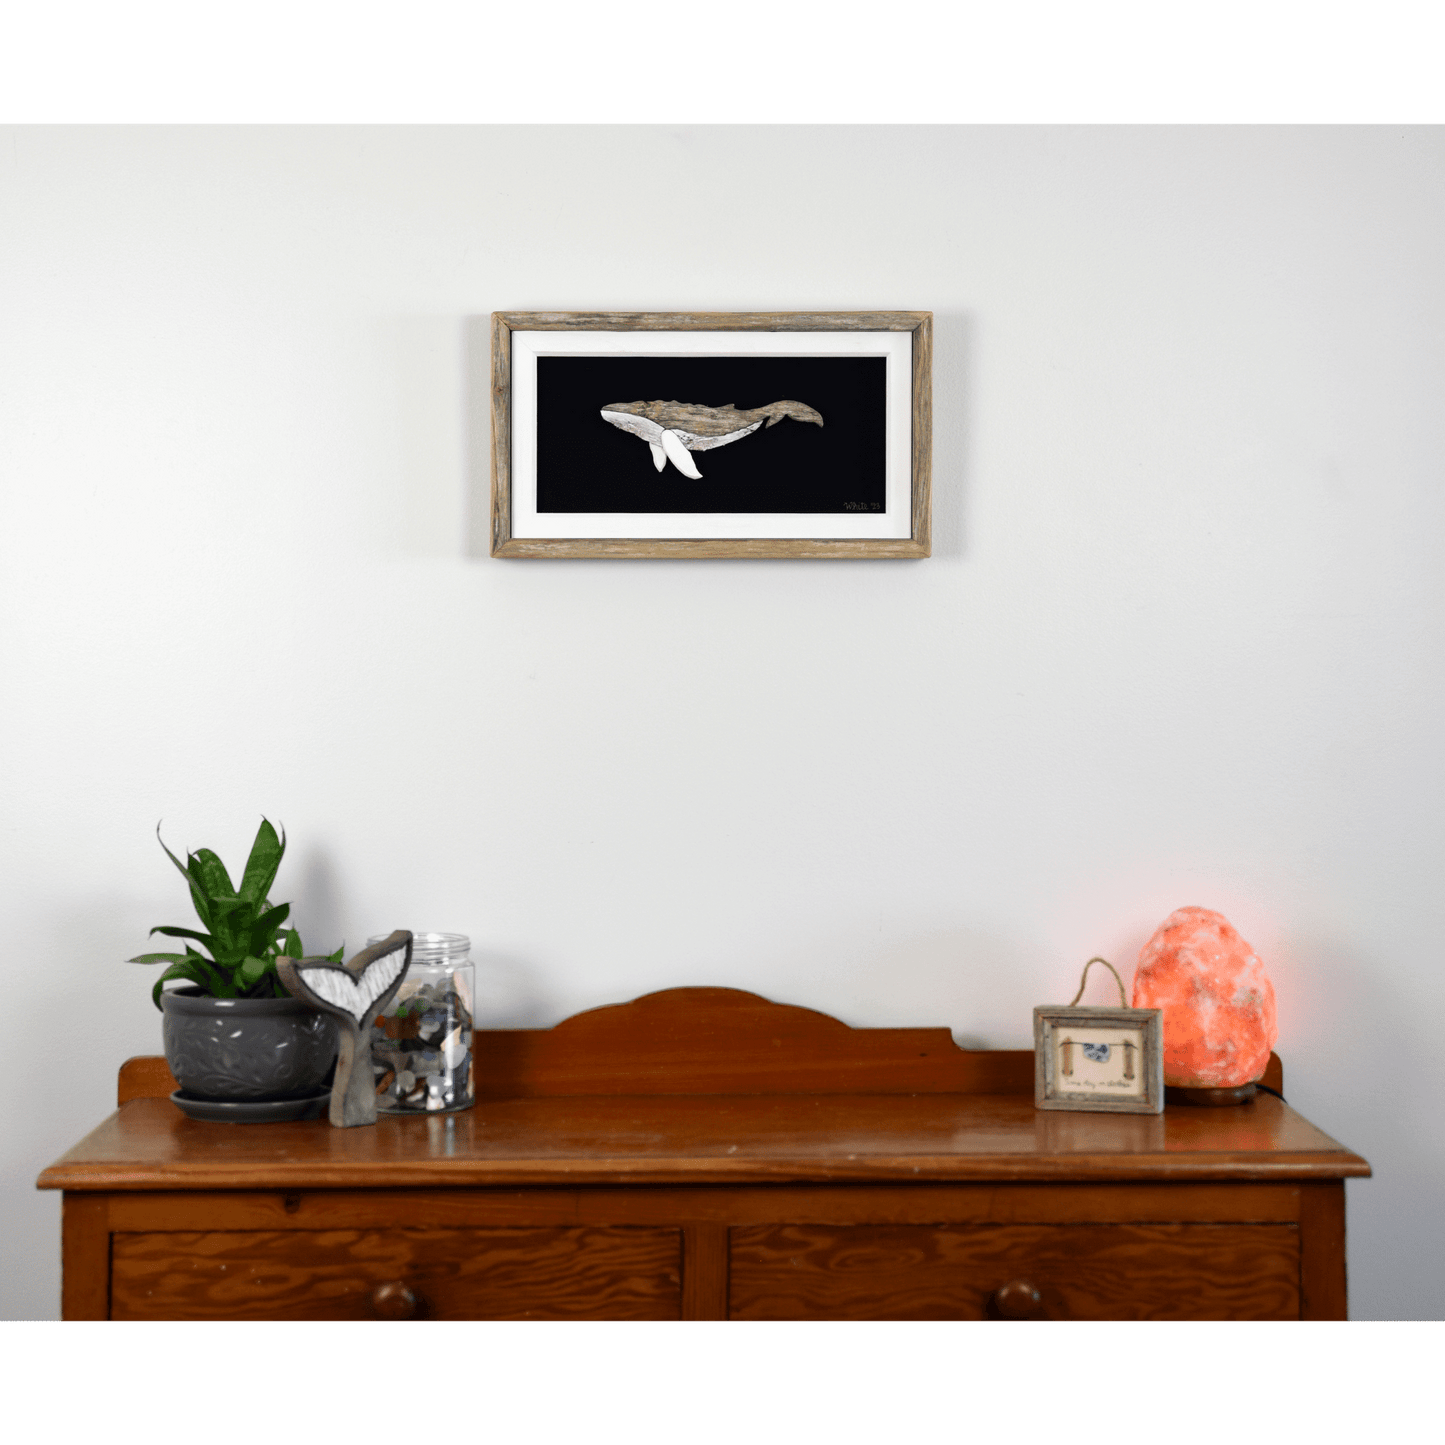   "The Humpback" by The White's Emporium is a mixed media artwork made from various woods and fabric featuring a humpback whale. 